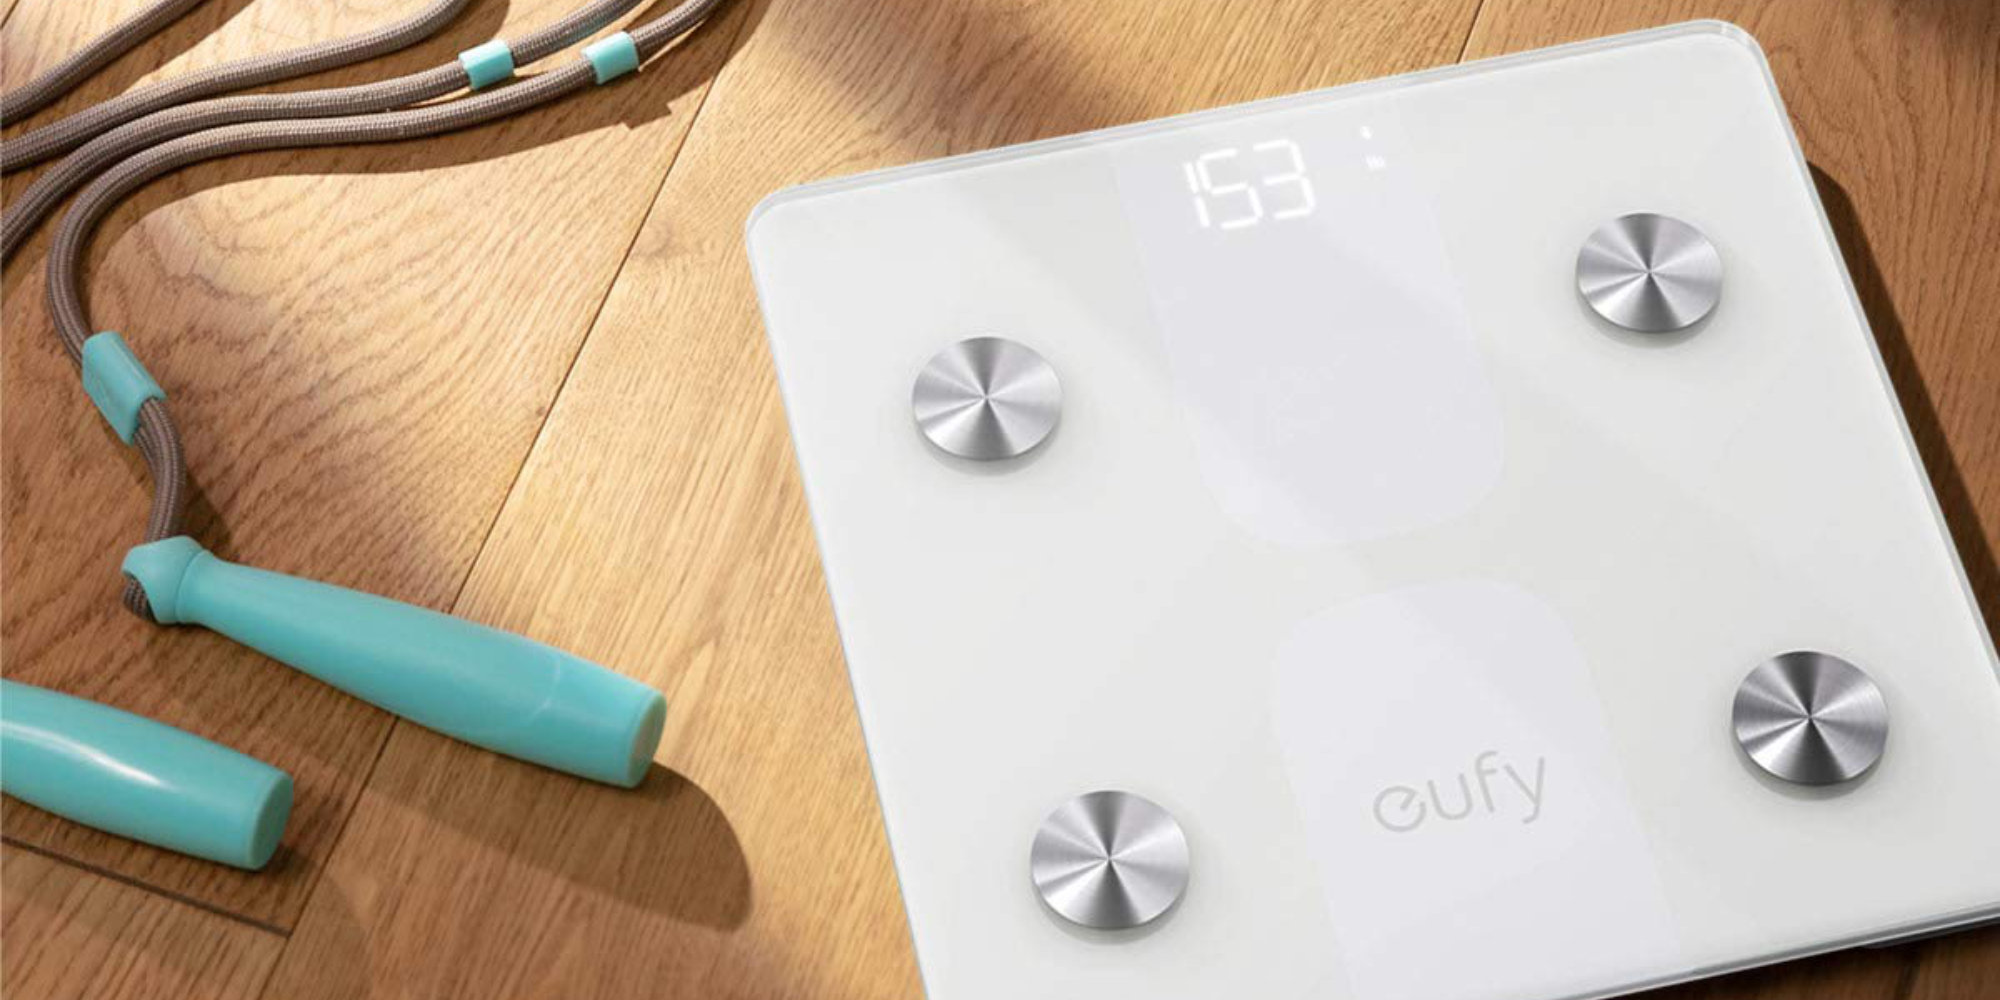 eufy by Anker Smart Scale C1 with Bluetooth